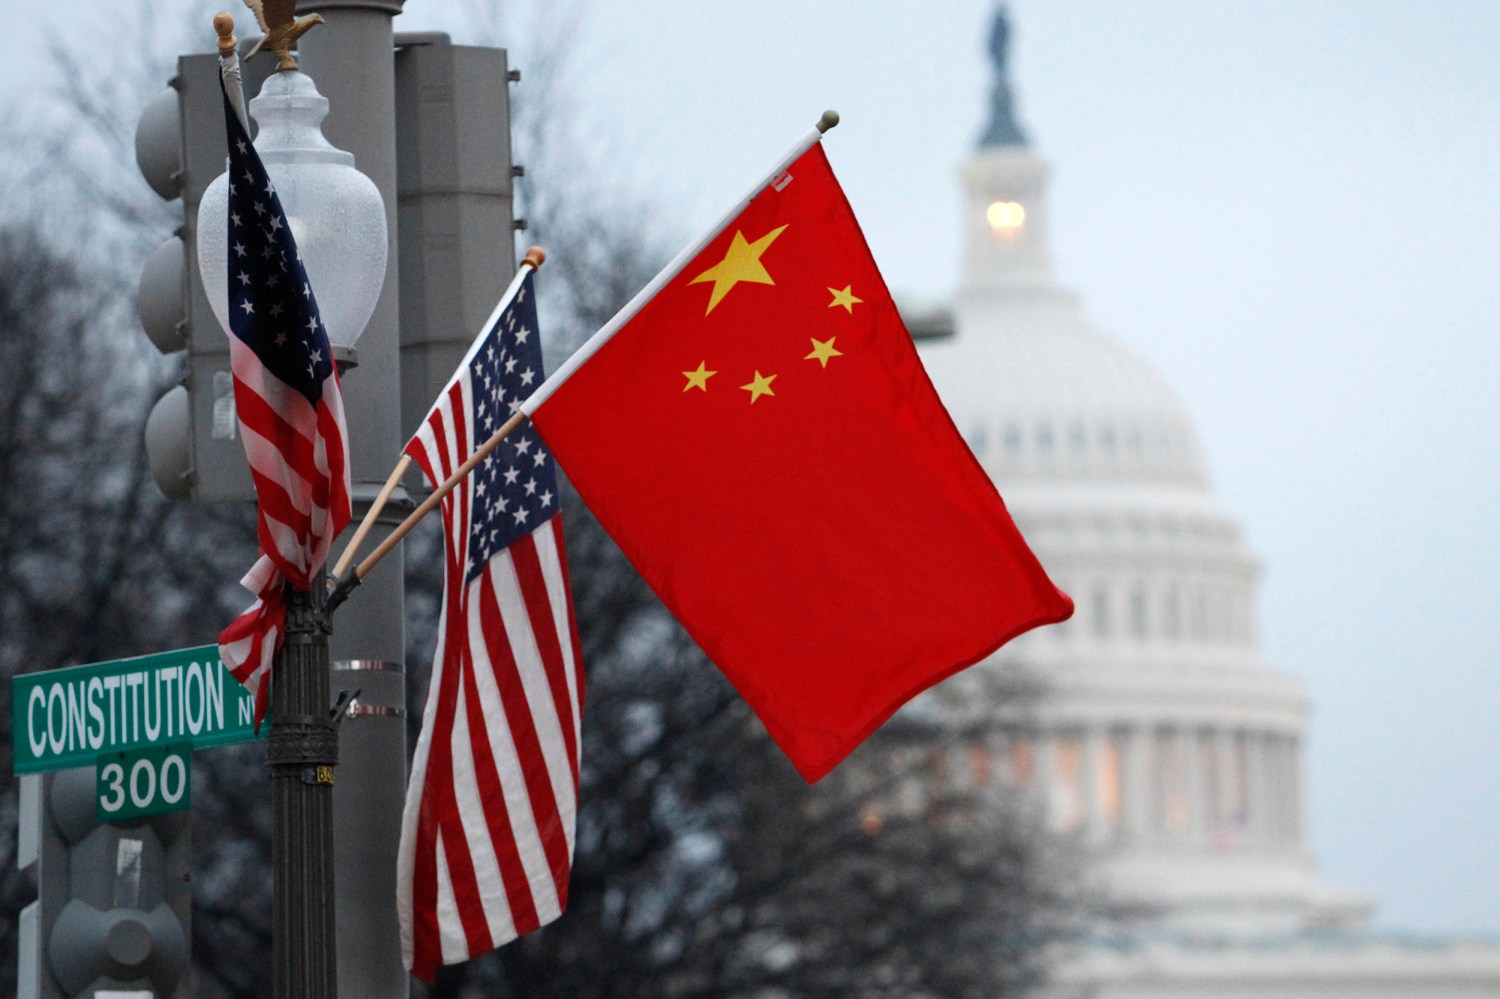 The People's Republic of China flag and the U.S. Stars and Stripes fly on a lamp post along Pennsylvania Avenue near the U.S. Capitol in Washington during Chinese President Hu Jintao's state visit, January 18, 2011. Hu arrived in the United States on Tuesday for a state visit with U.S. President Barack Obama that is aimed at strengthening ties between the world's two biggest economies. REUTERS/Hyungwon Kang (UNITED STATES - Tags: POLITICS CITYSCAPE) - GM1E71J0K0R01